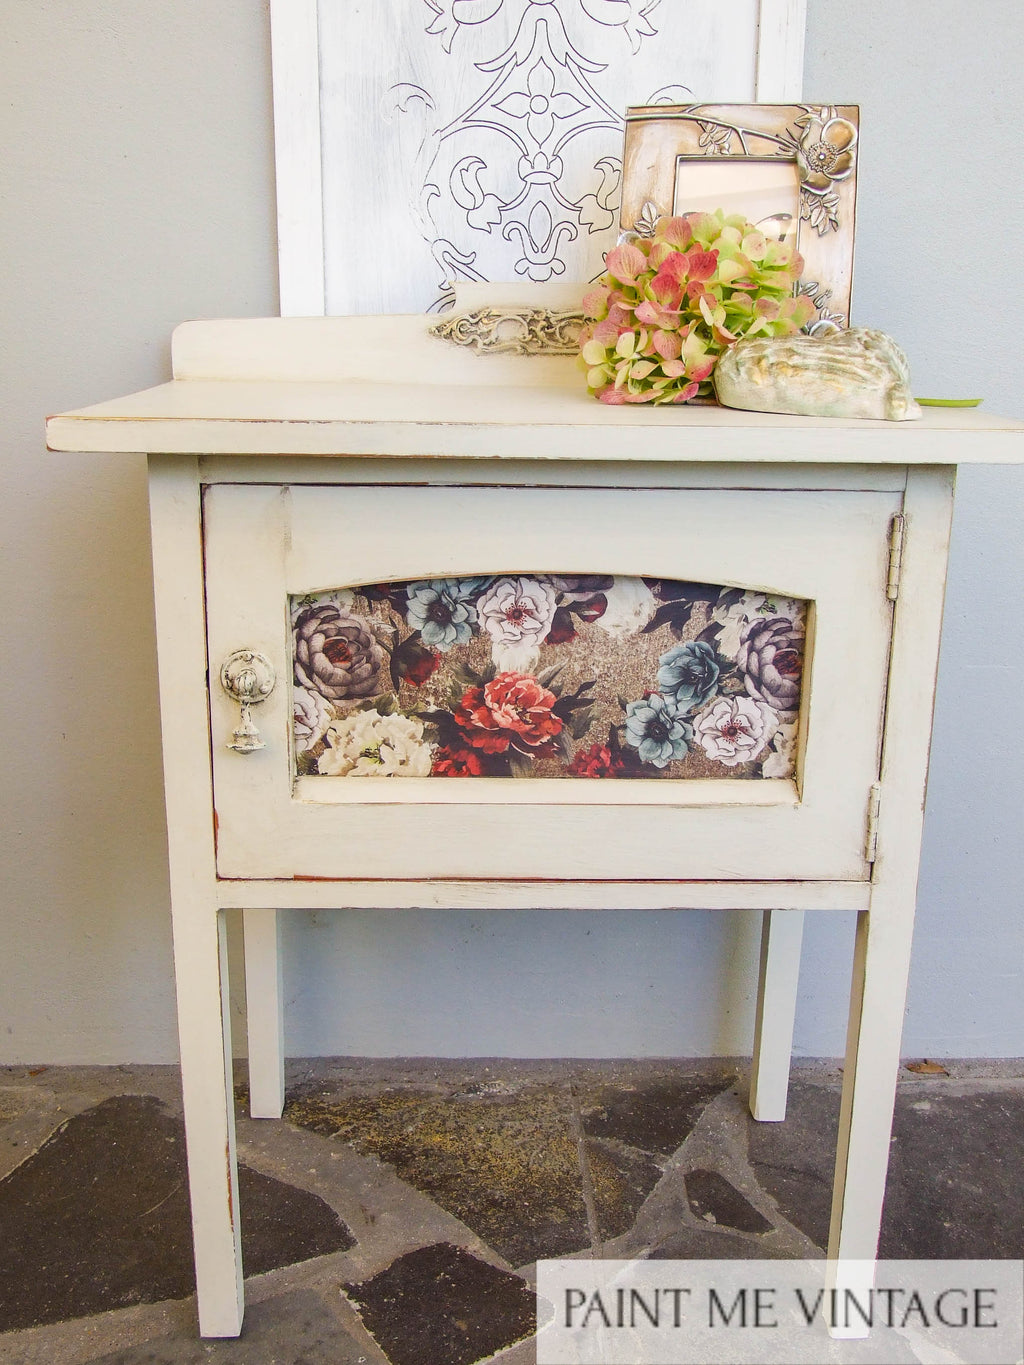 Yorkshire Stone Rustic Cabinet with Tea Rose Garden transfer NZ